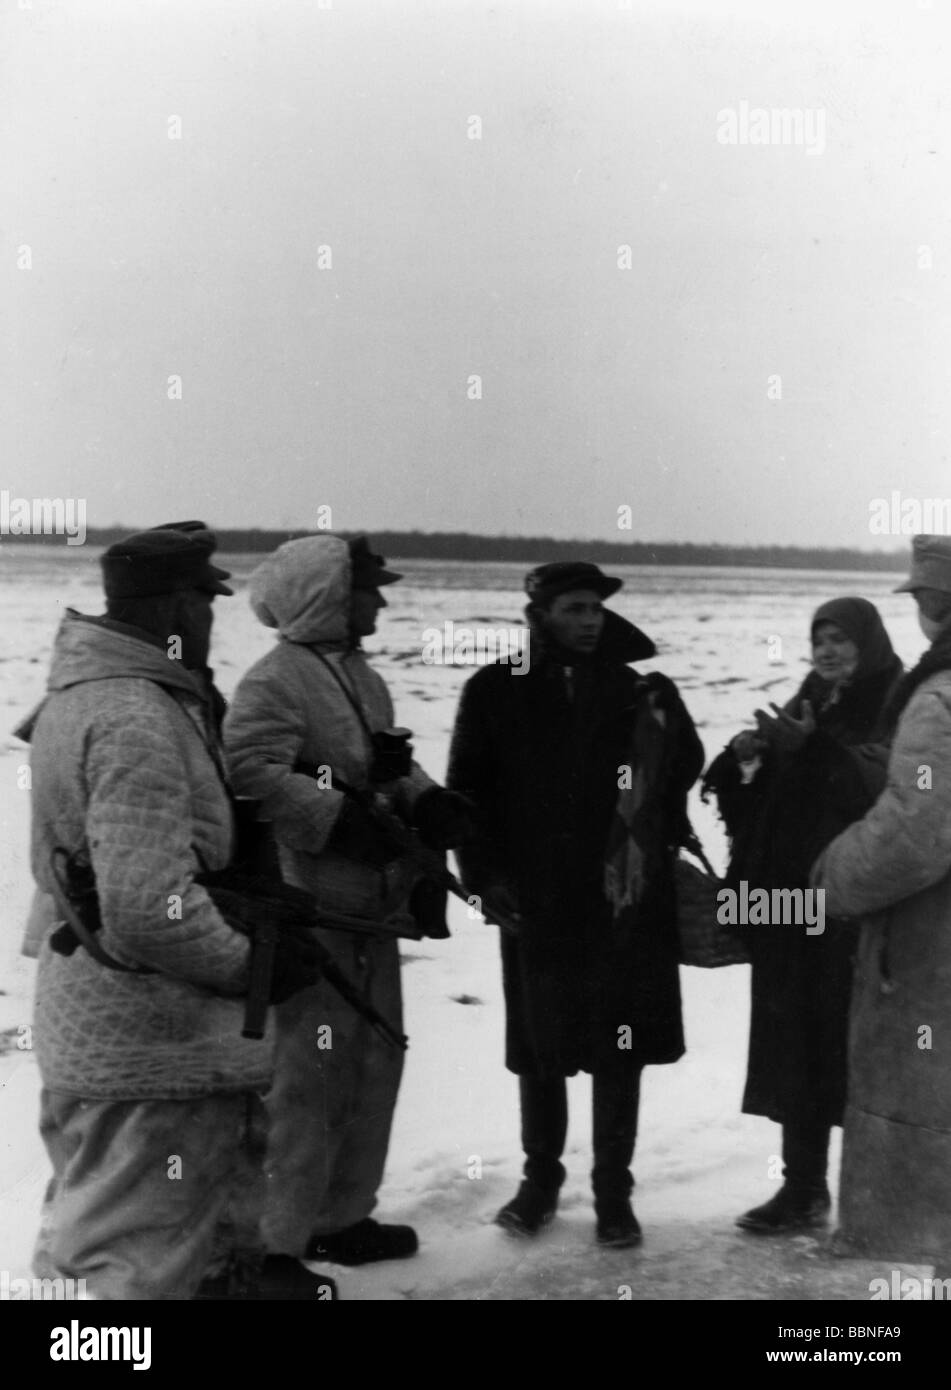 events, Second World War / WWII, Russia 1944 / 1945, German counterattack near Petchara at the Bug river, Wehrmacht soldiers questioning civilians, mid January 1944, Eastern Front, winter, Wehrmacht, snow suit, suits, USSR, road, winter clothes, clothing, dress, army, 20th century, historic, historical, submachine gun, guns, MP 40, people, 1940s, Stock Photo